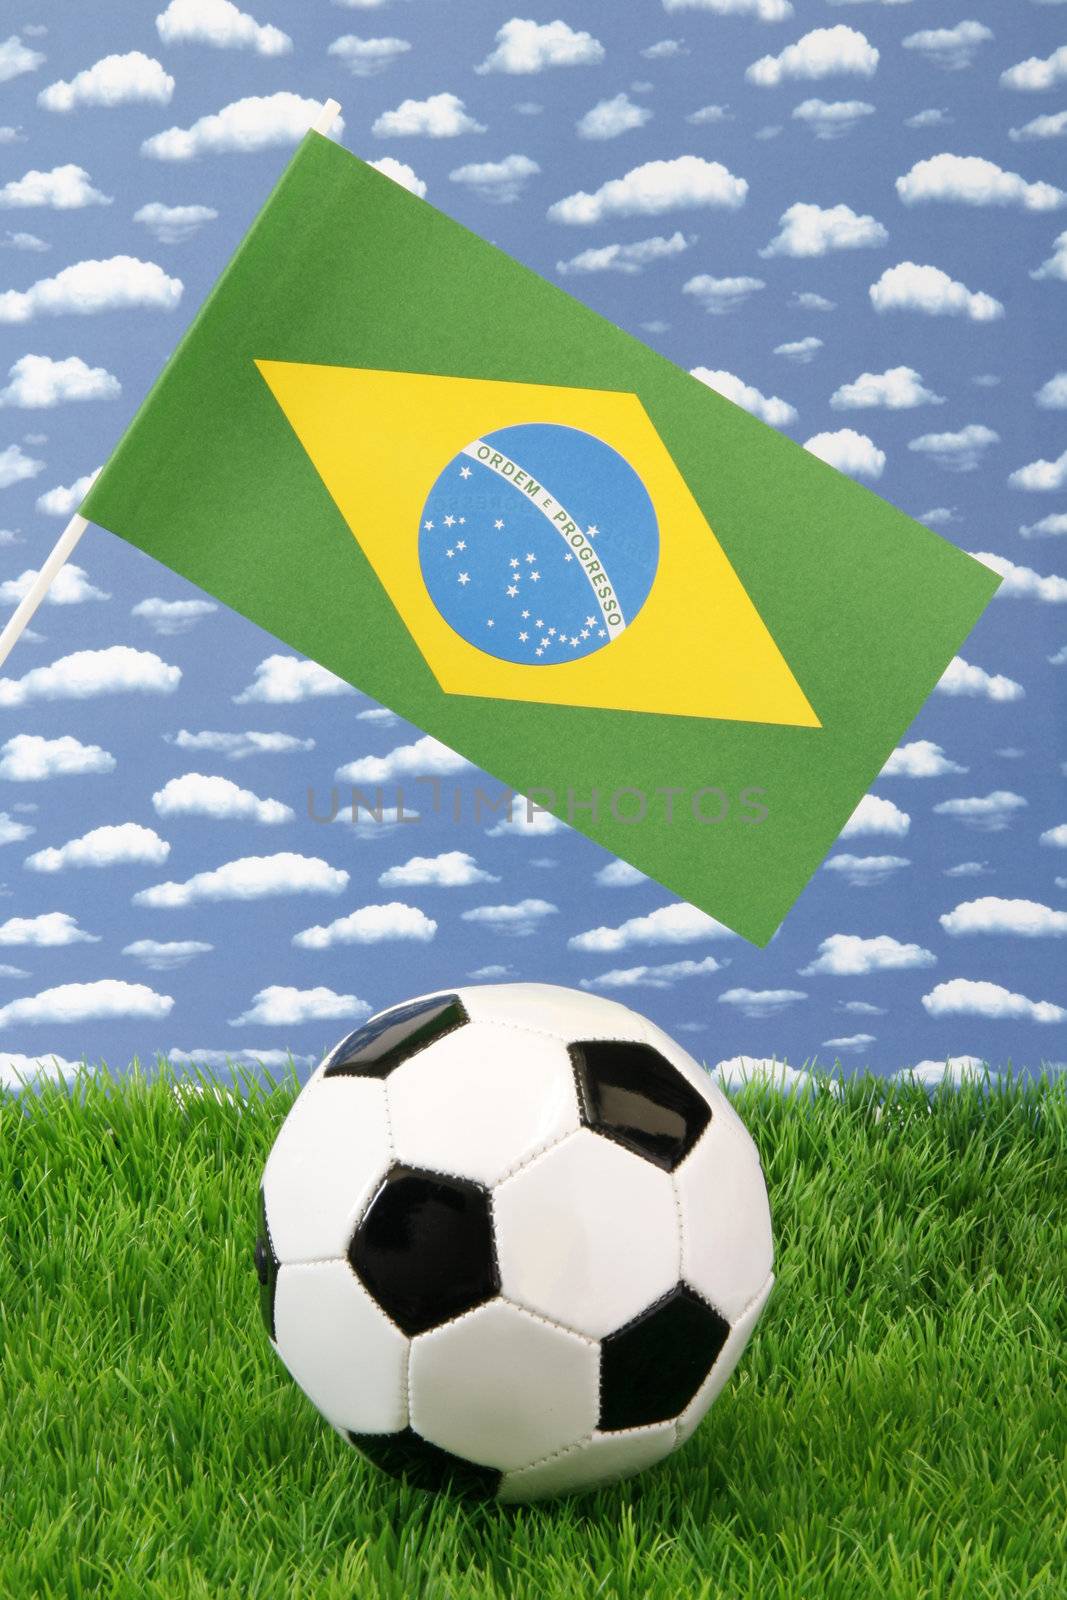 Soccerball on grass with brazilian national flag over sky background